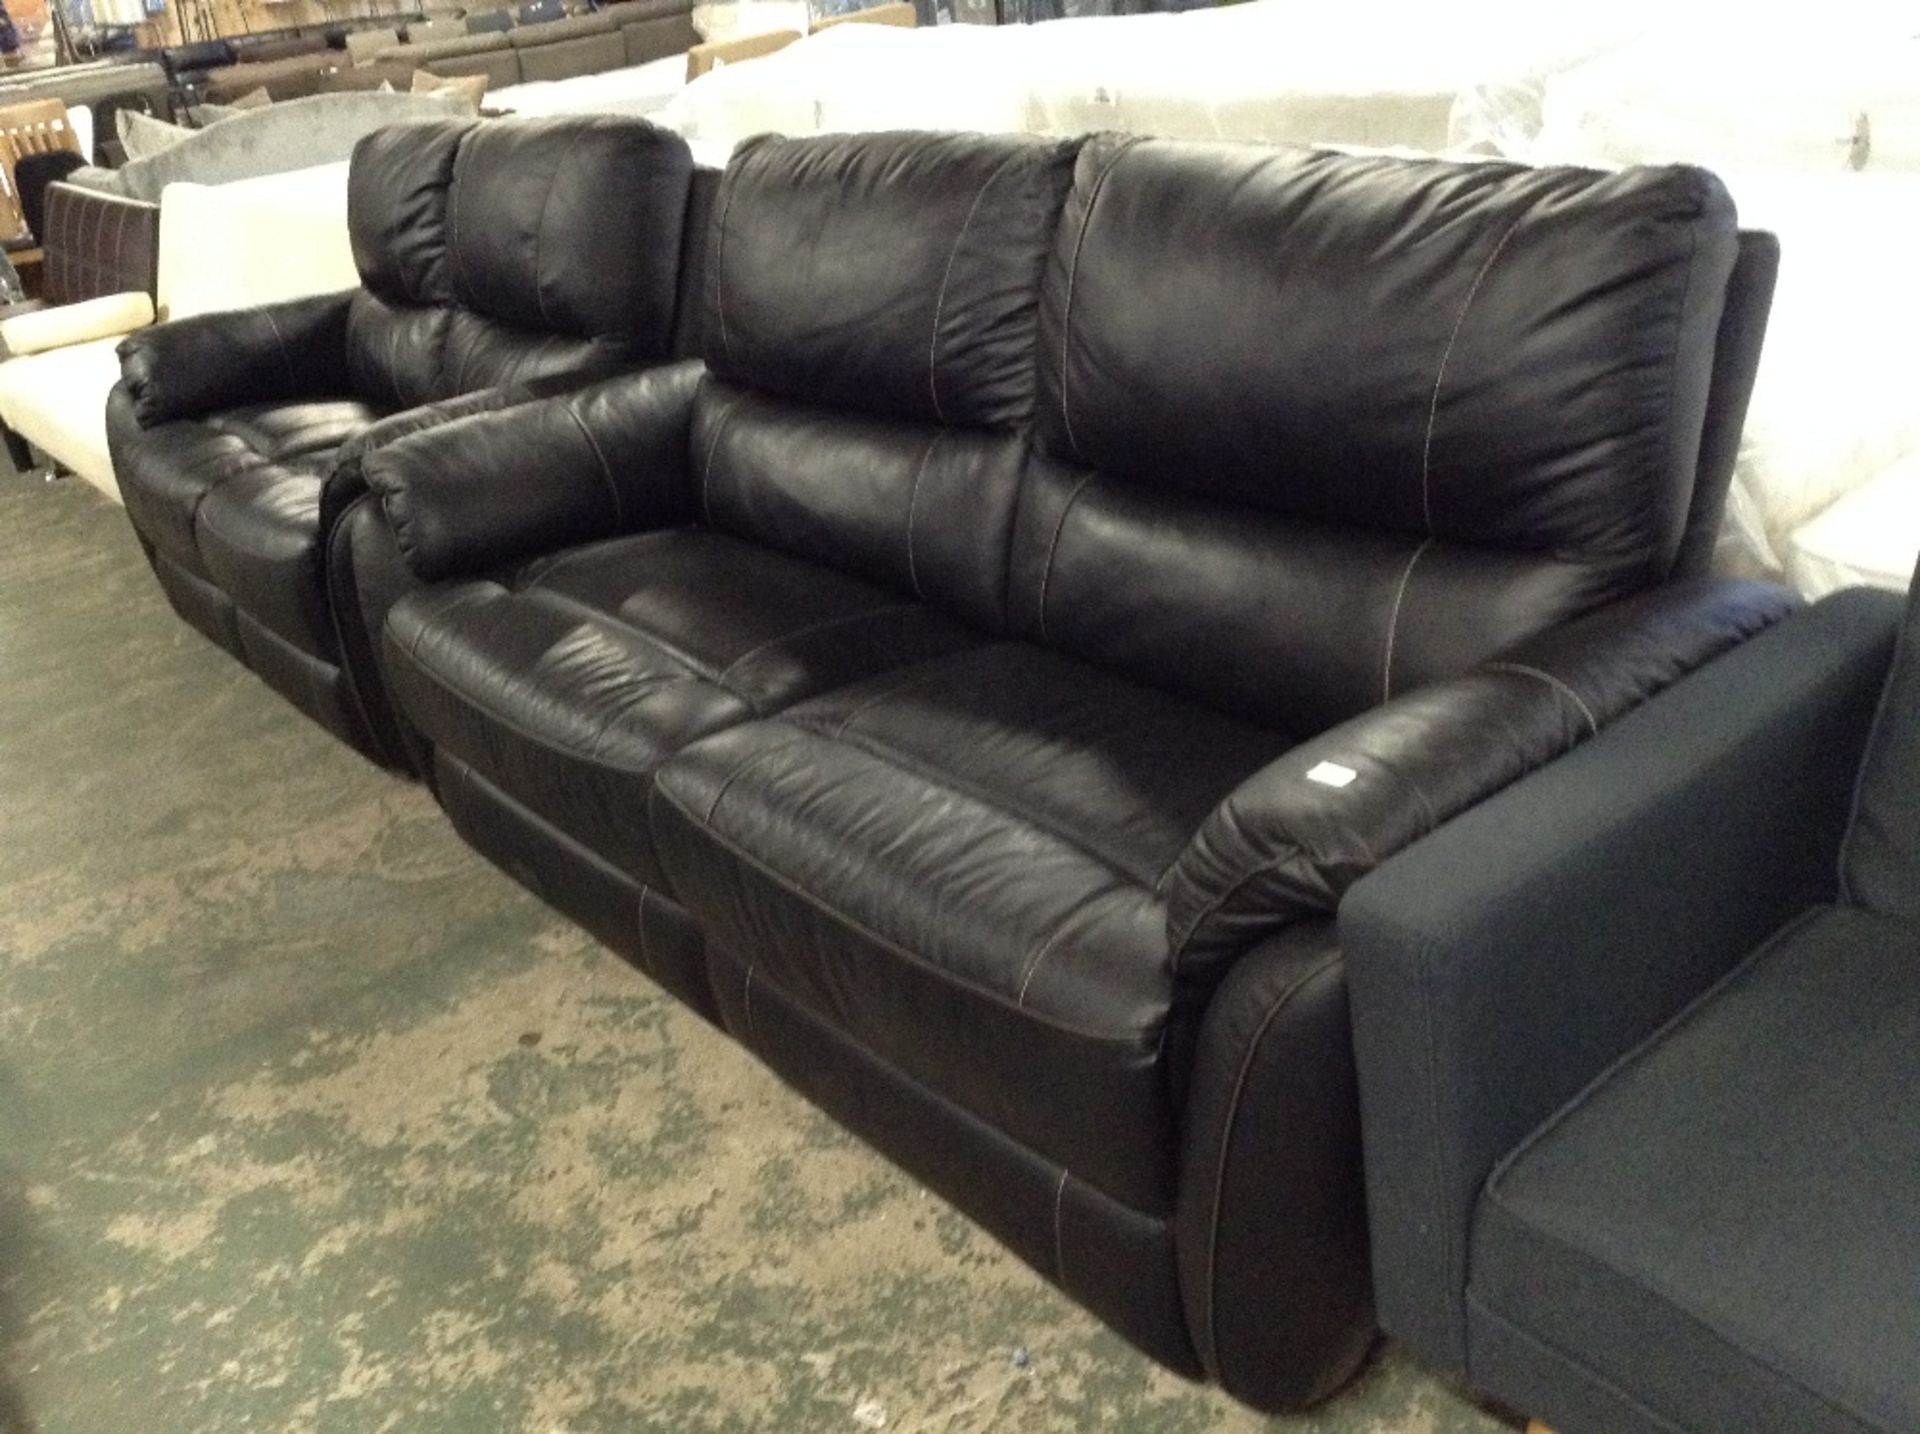 BLACK LEATHER WITH WHITE STITCHING 3 SEATER SOFA A